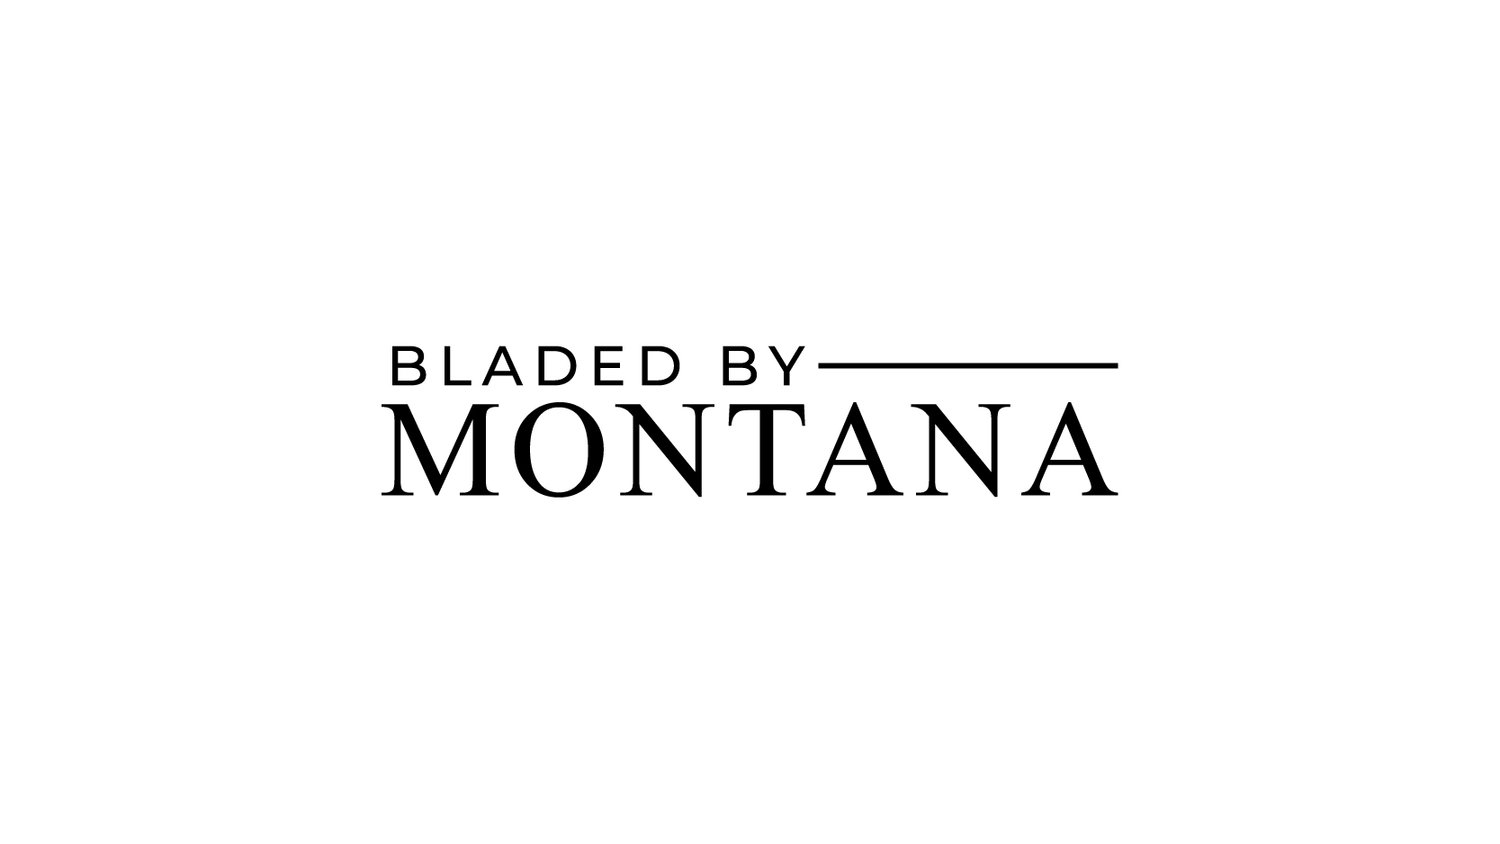 Bladed by Montana